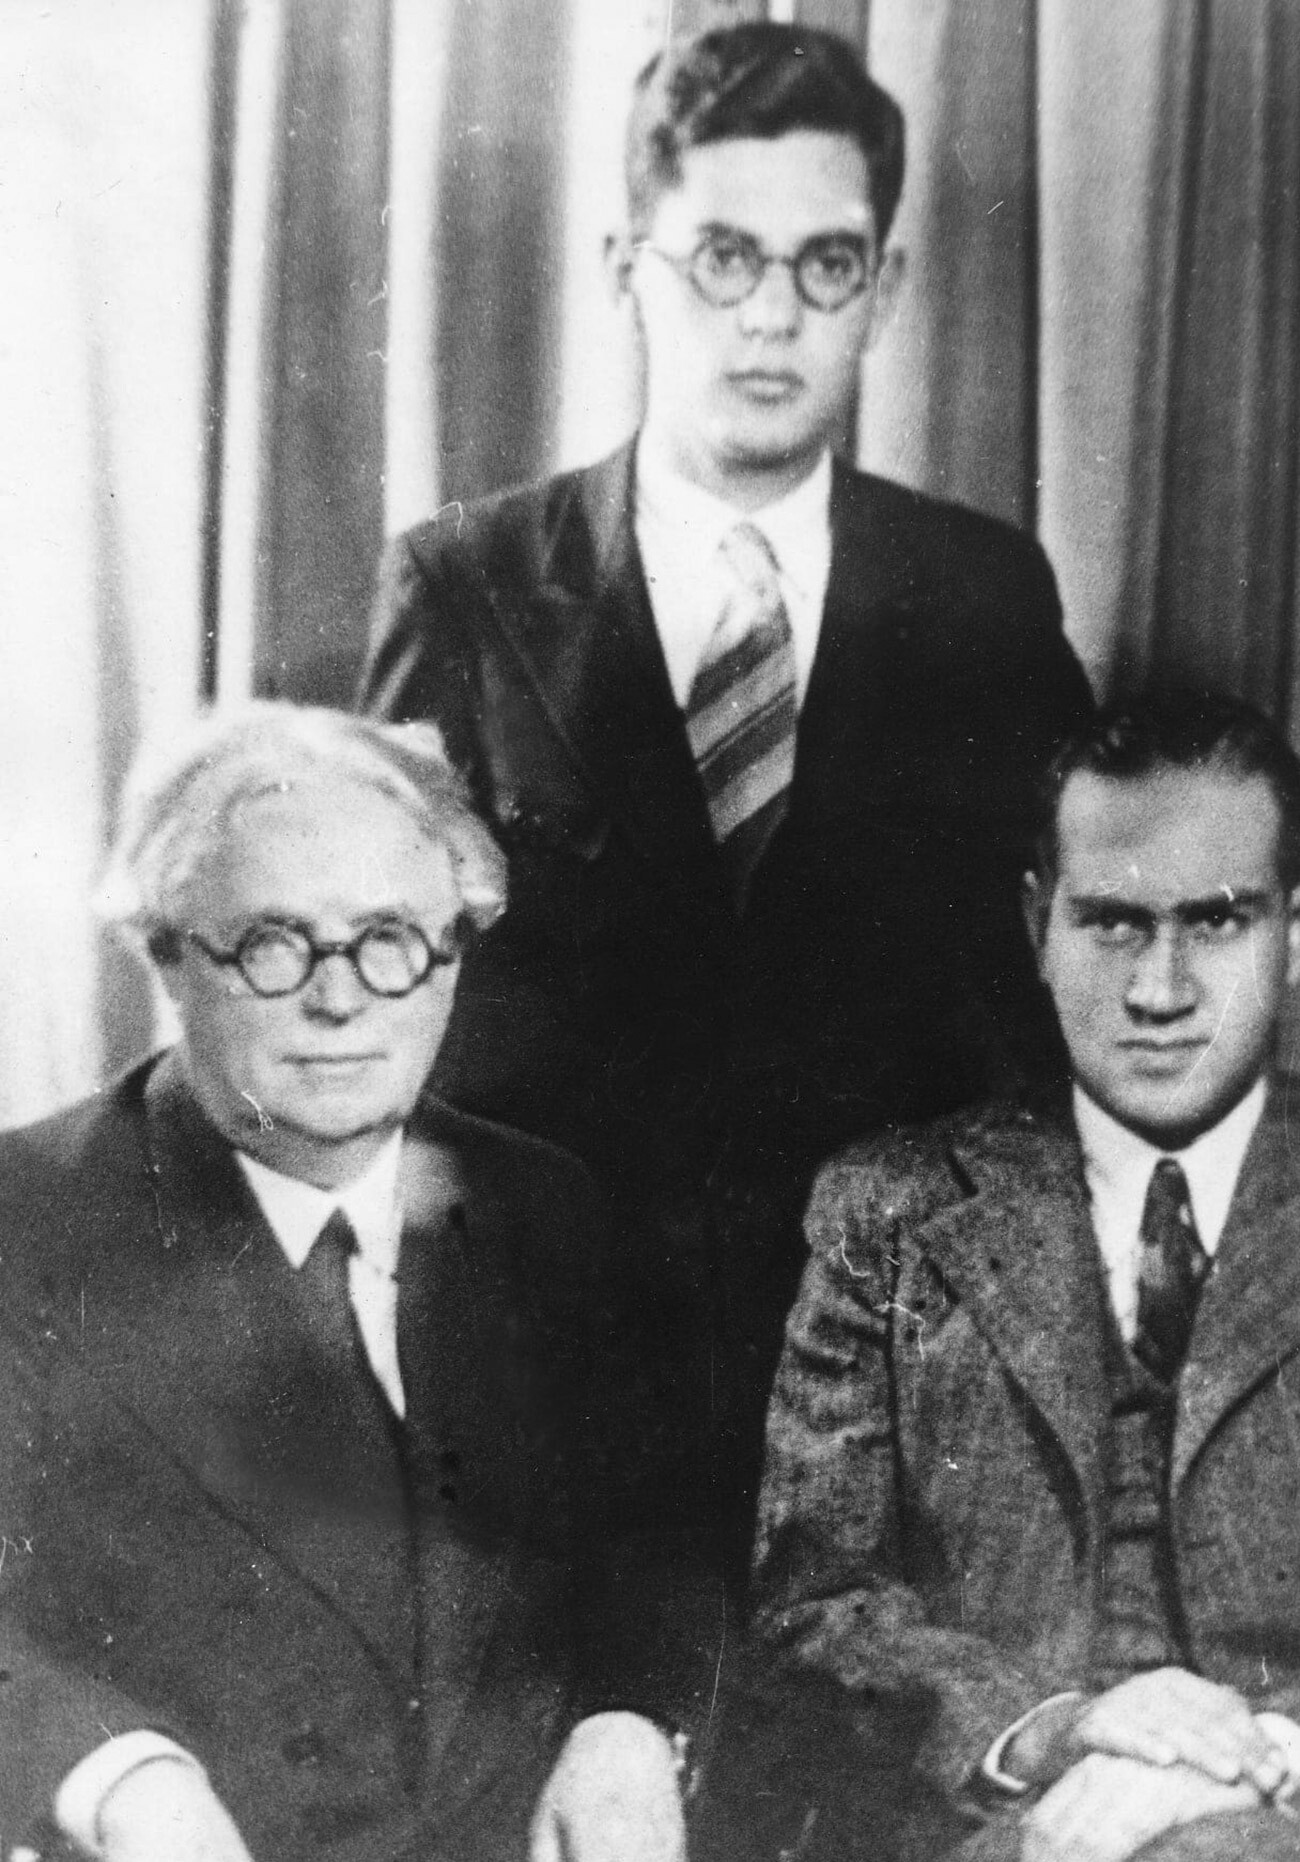 Leon Sachs (center) as a 1st year student of the Moscow Conservatory. With his teacher David Oistrakh (right) and his teacher Peter Stolyarsky (left). 